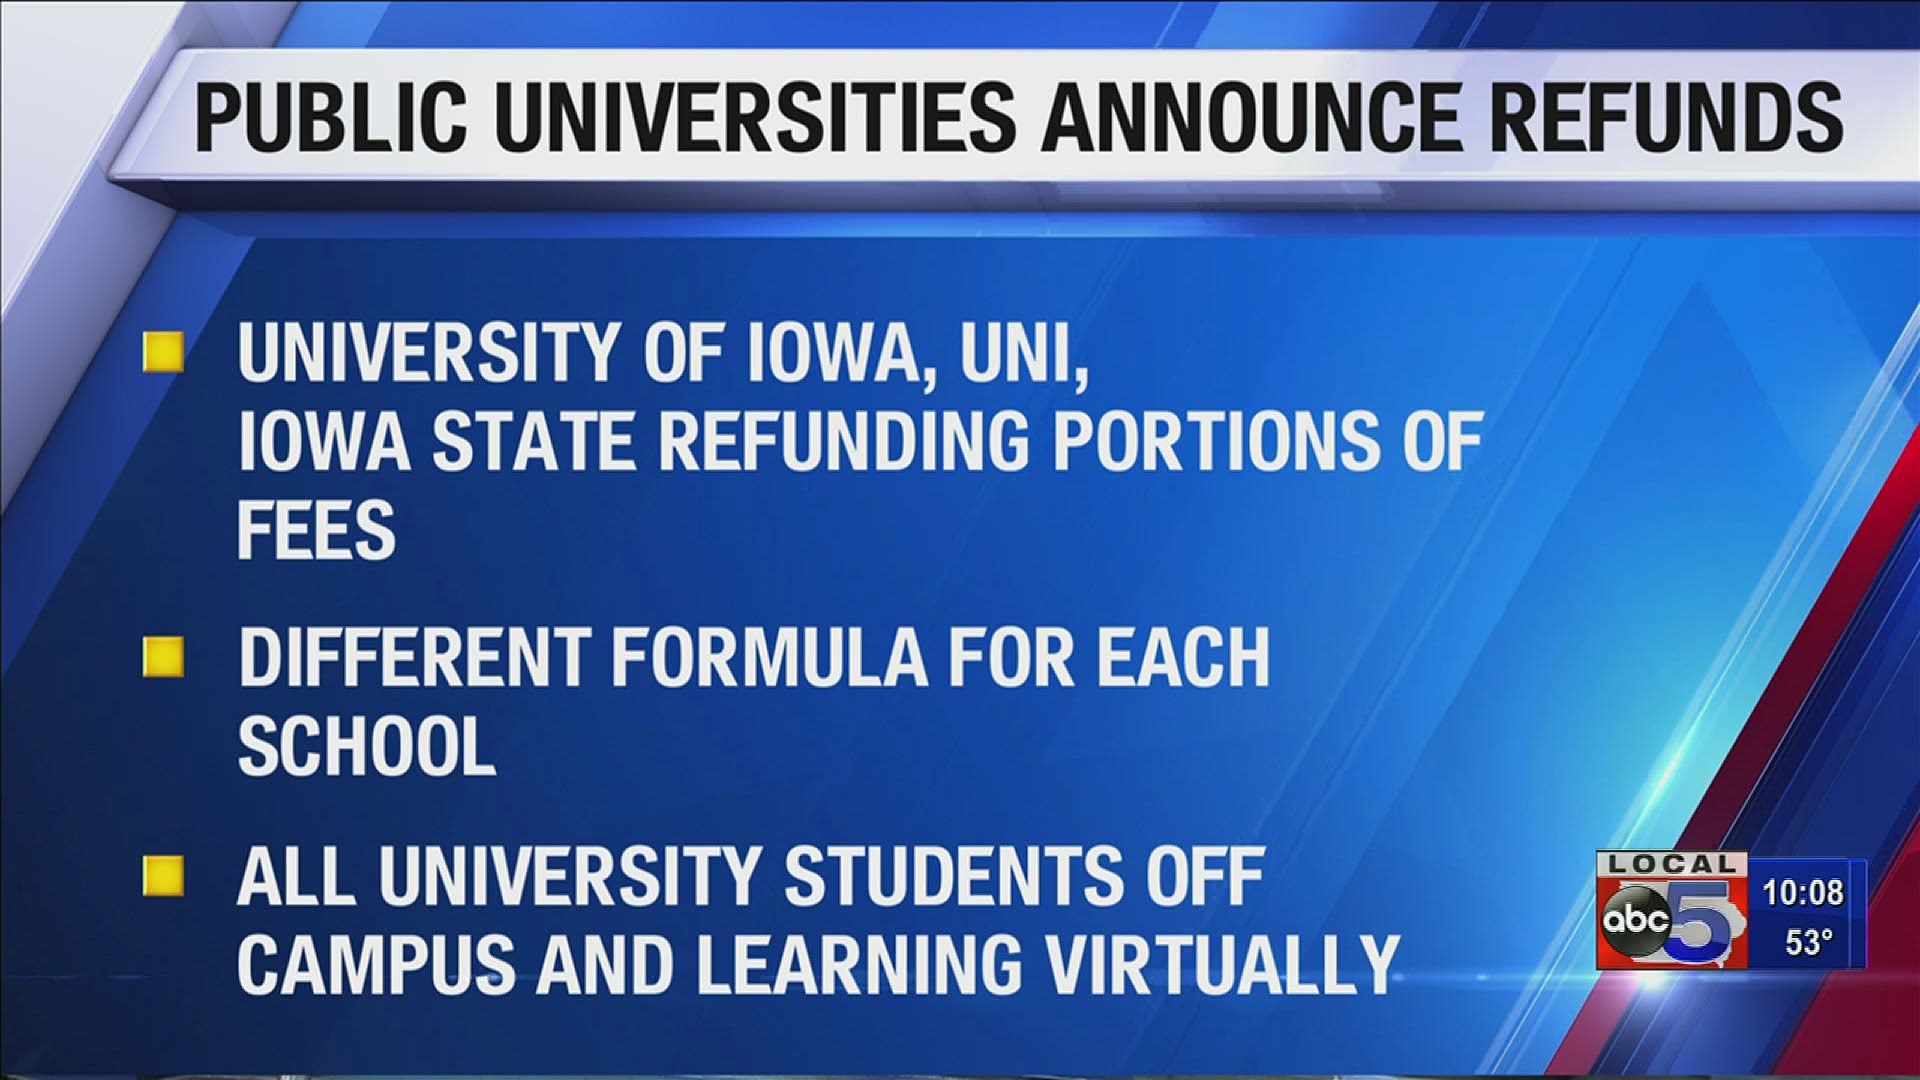 Here's how Iowa's public universities are handling tuition refunds due to COVID-19